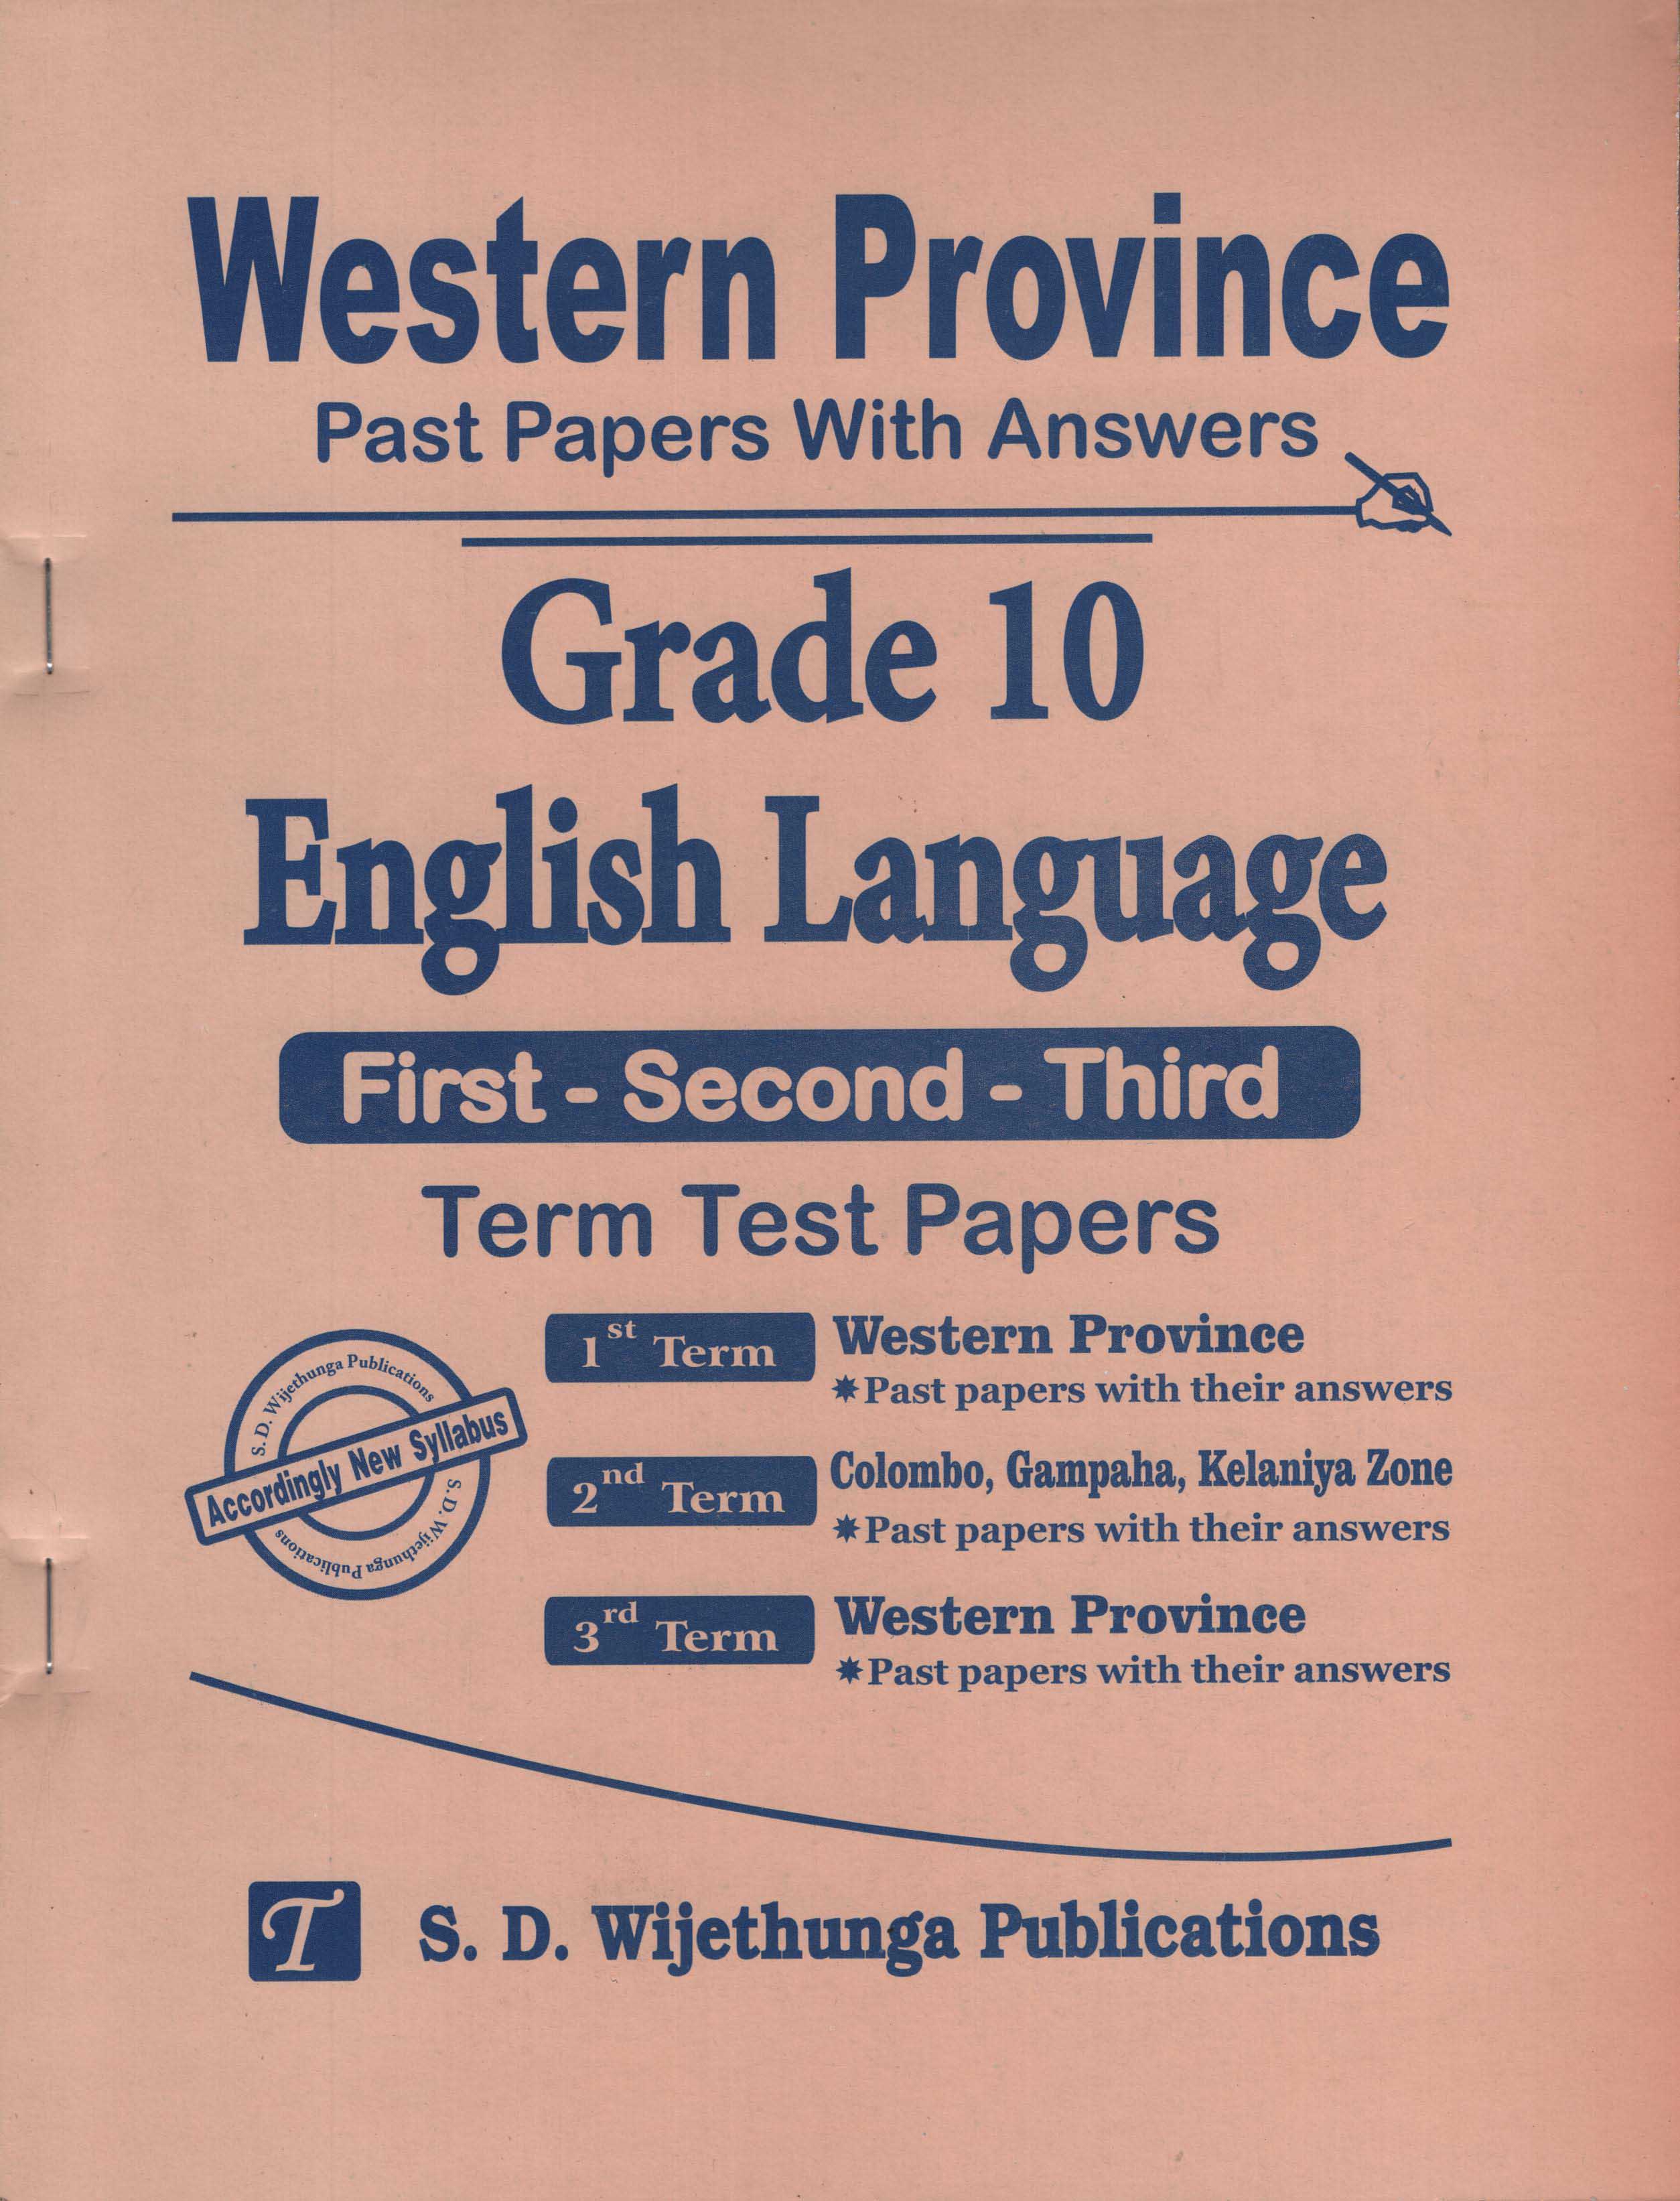 Western Province Past Papers with Answers Grade 10 English Language (First-Second-Third) Term Test Papers